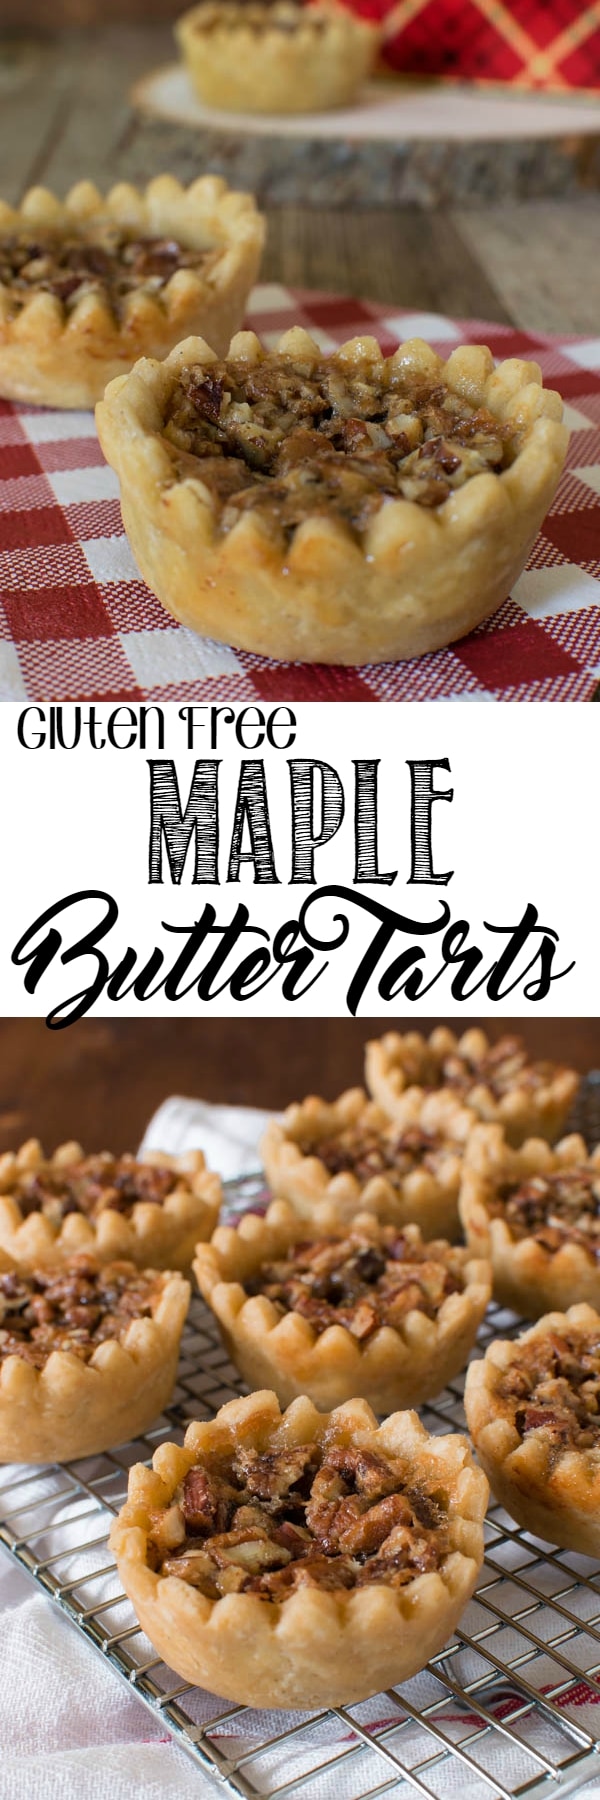 These decadent Gluten Free Maple Butter Tarts, with their crisp, buttery shell and gooey centers, are a true Canadian treasure.